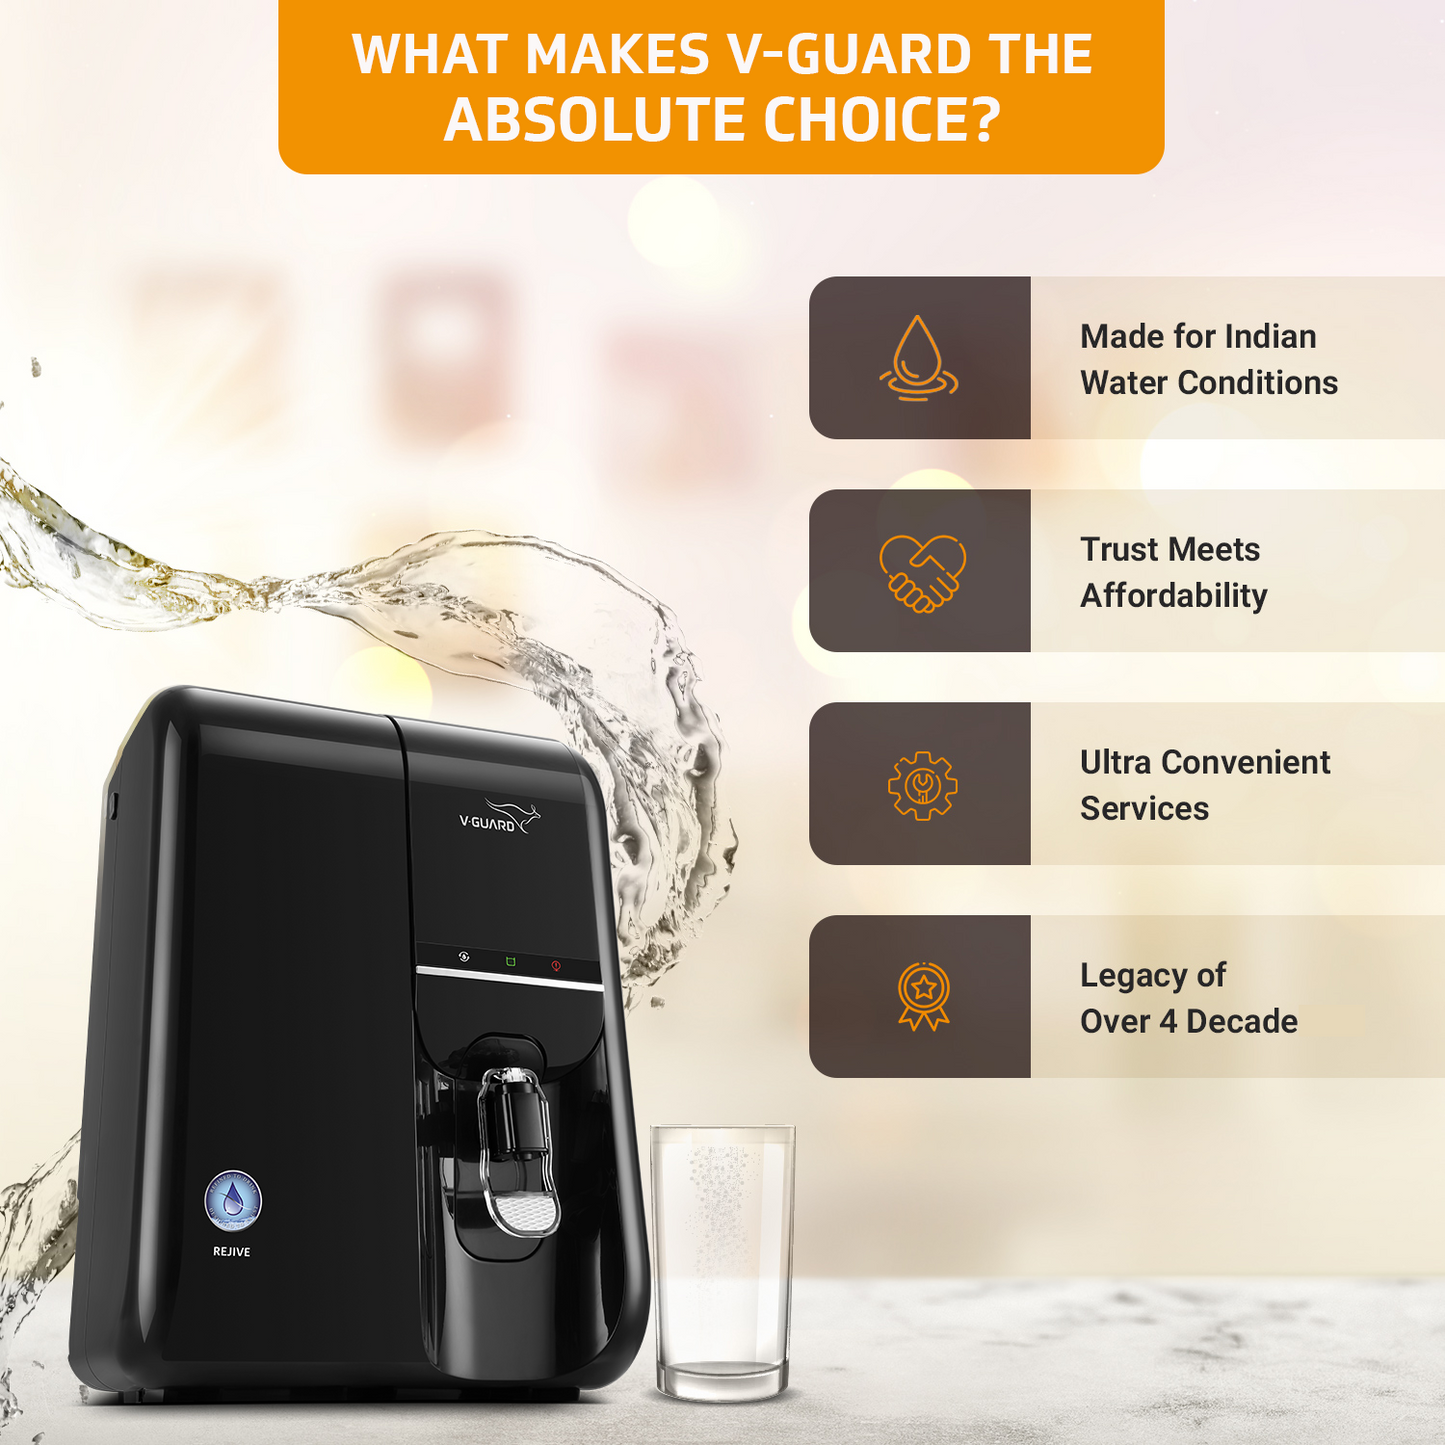 Rejive RO UF Water Purifier with Mineral Health Charger, Copper Protection and Stainless Steel Tank, 7 Stage Purification, Suitable for Water with TDS up to 2000 ppm